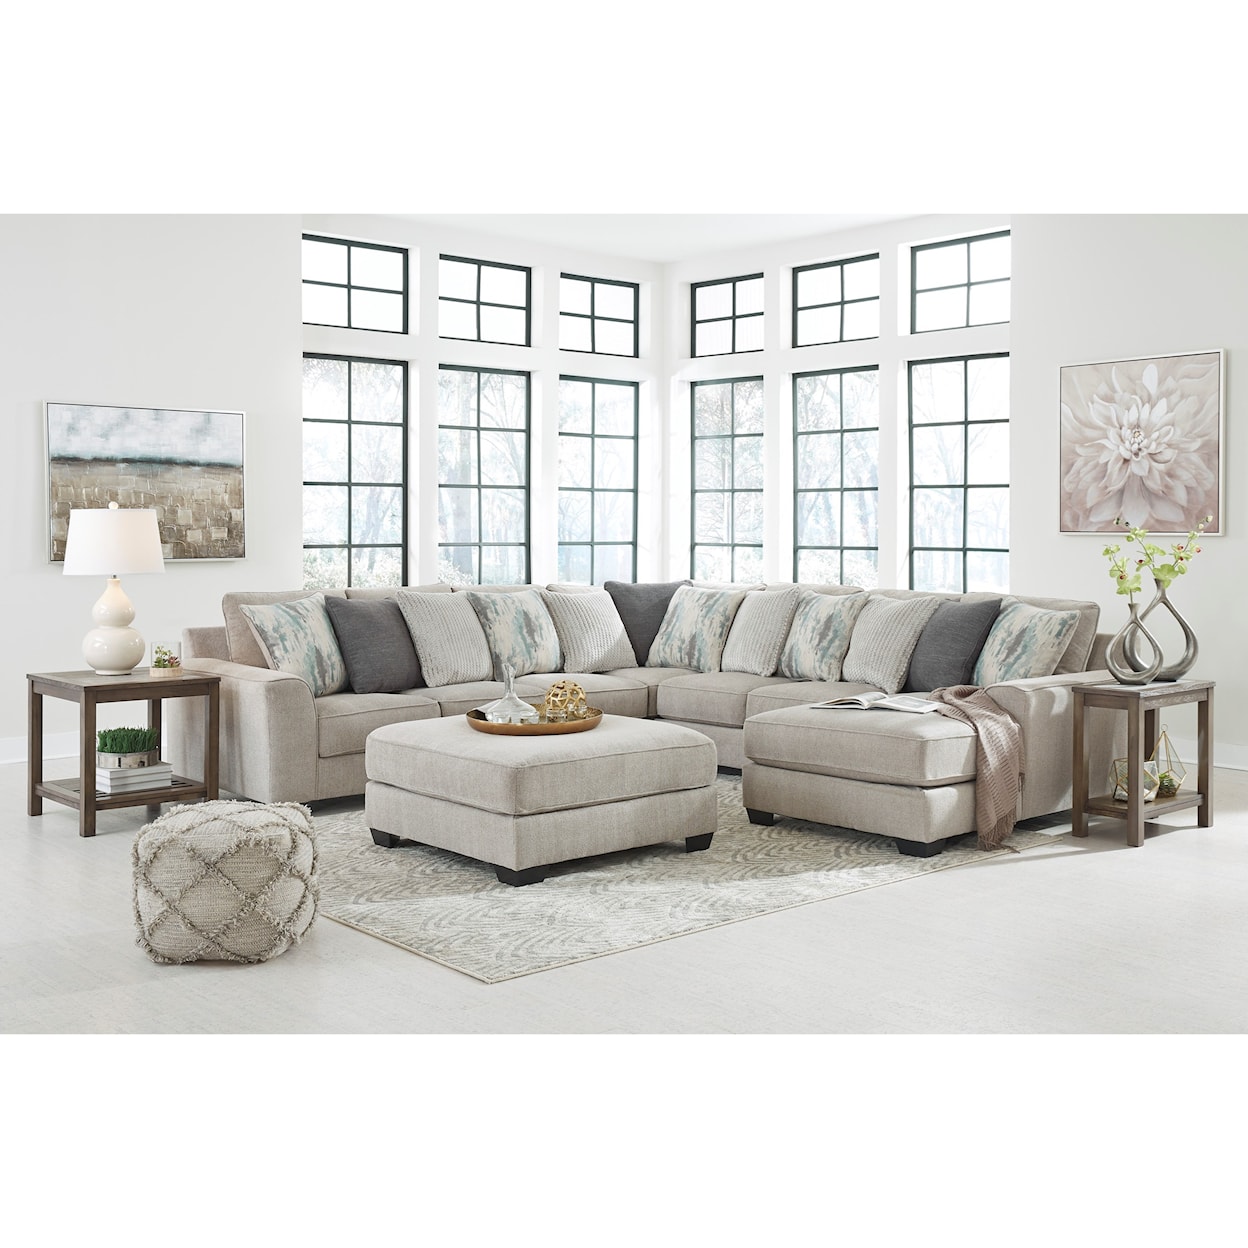 Benchcraft Ardsley 5pc Sectional and ottoman